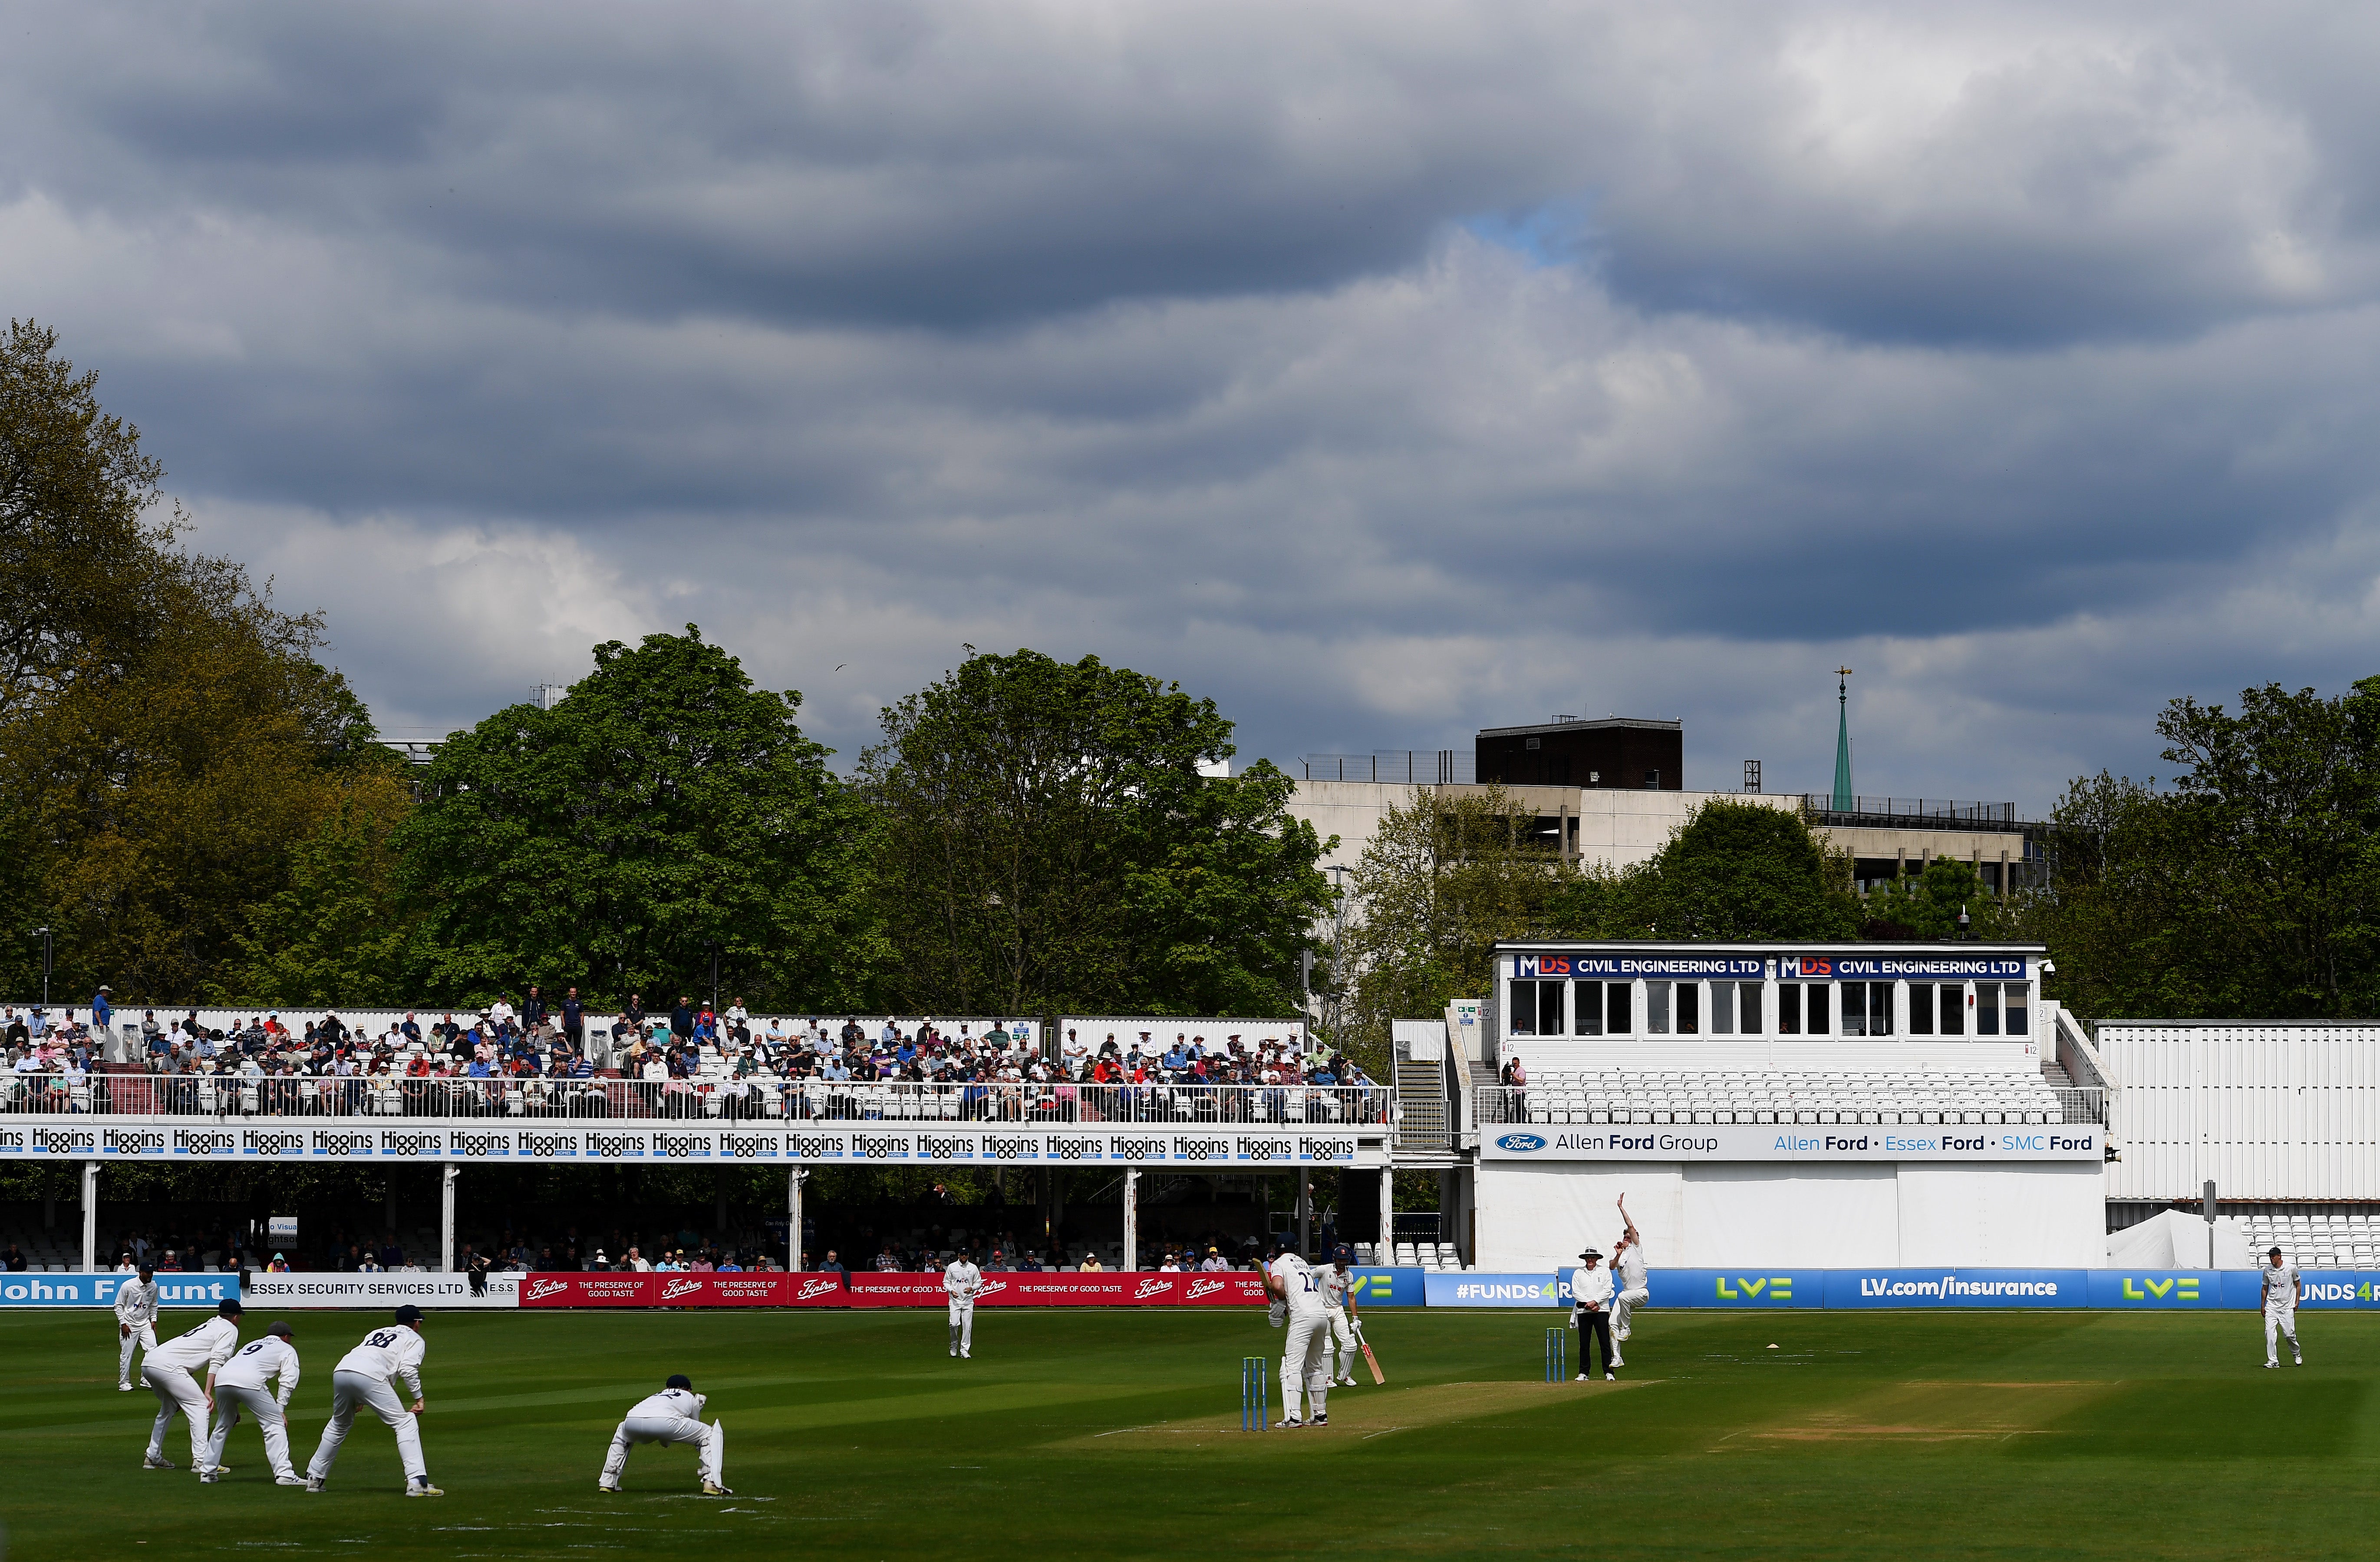 A general view of The Cloud County Ground